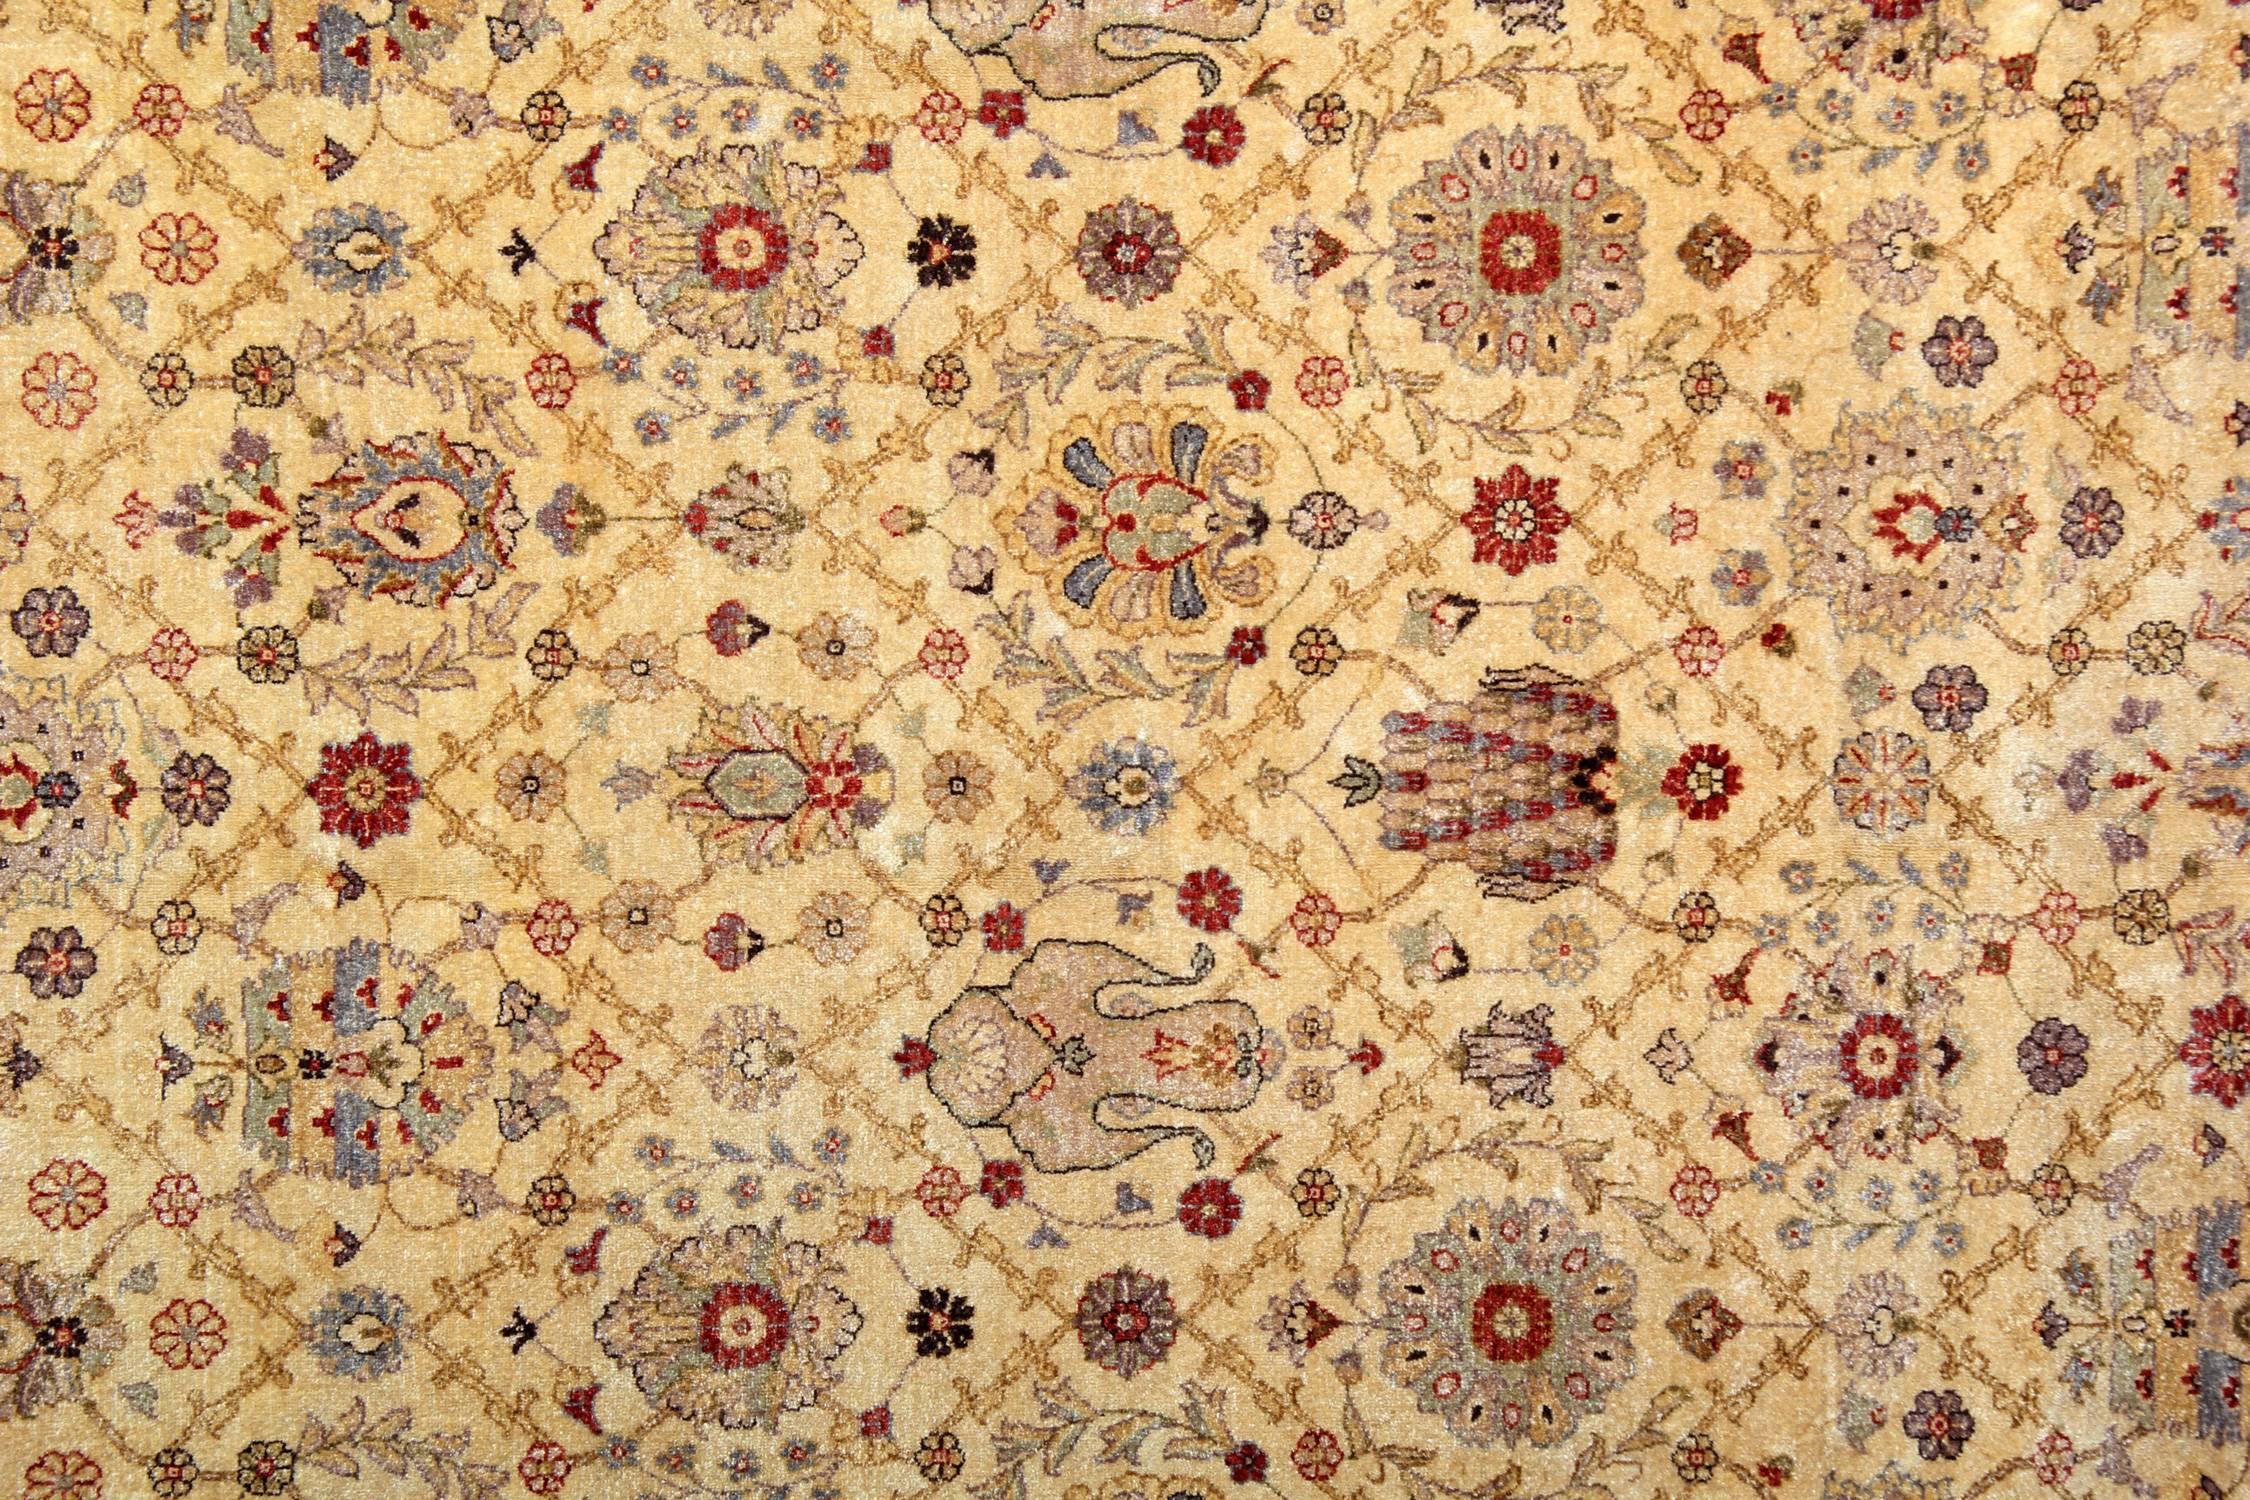 This is traditional rugs kind of our luxury rugs made of own looms by our master weavers of Afghan rugs, This golden cream rug is made with organic vegetable dyes all handspun wool rugs. This carpet rug is kind of patterned rugs all-over floral rugs